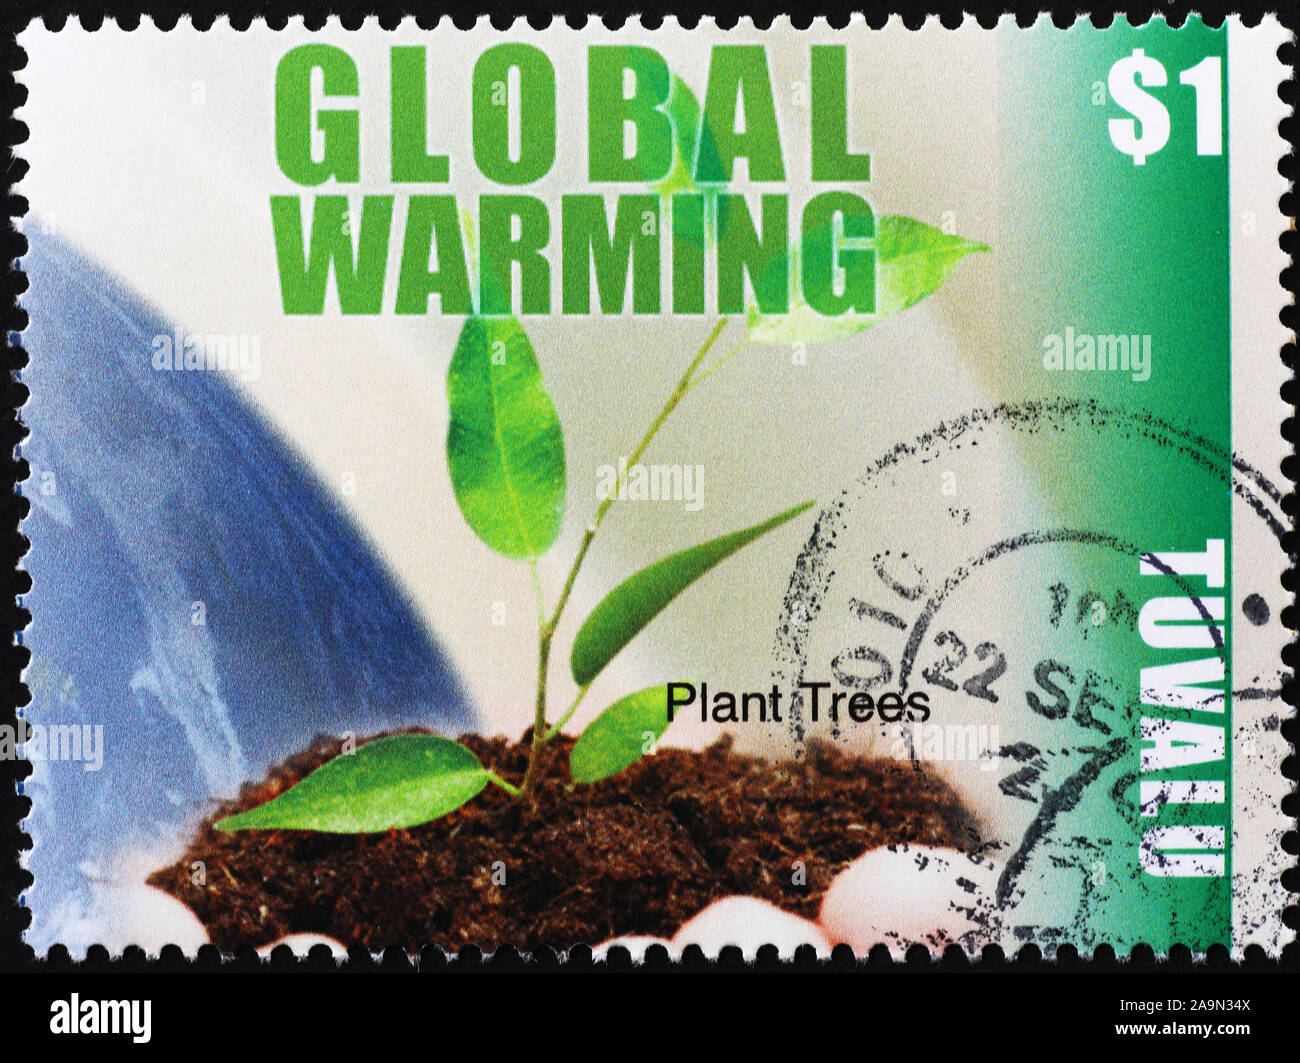 Exhortation to plant trees against Global Warming on stamp Stock Photo